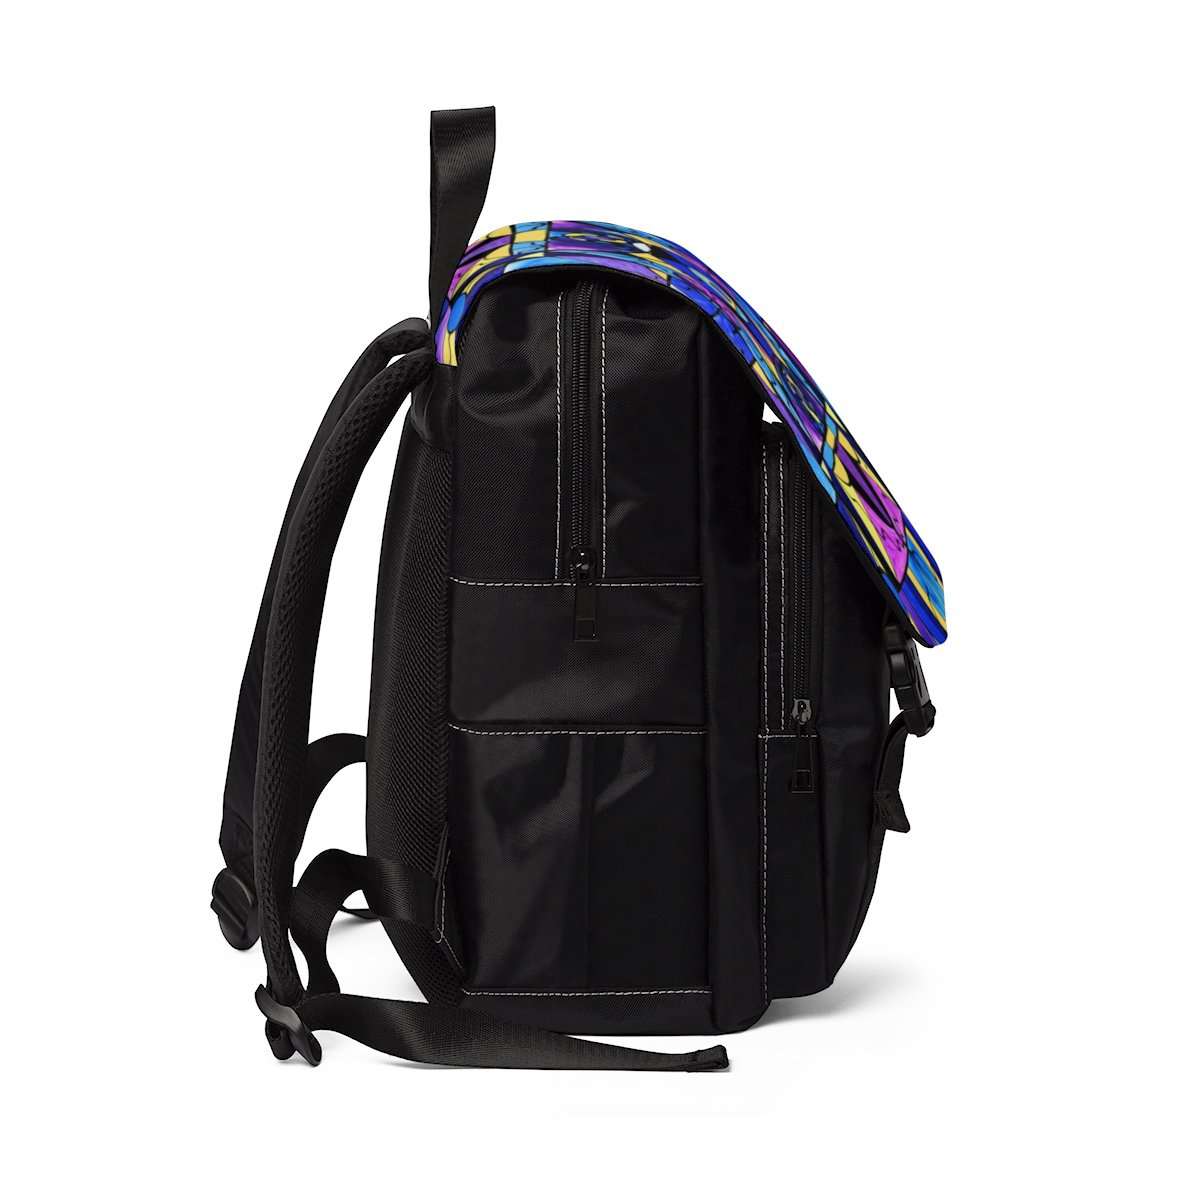 we-are-the-best-place-to-shop-i-know-unisex-casual-shoulder-backpack-sale_1.jpg